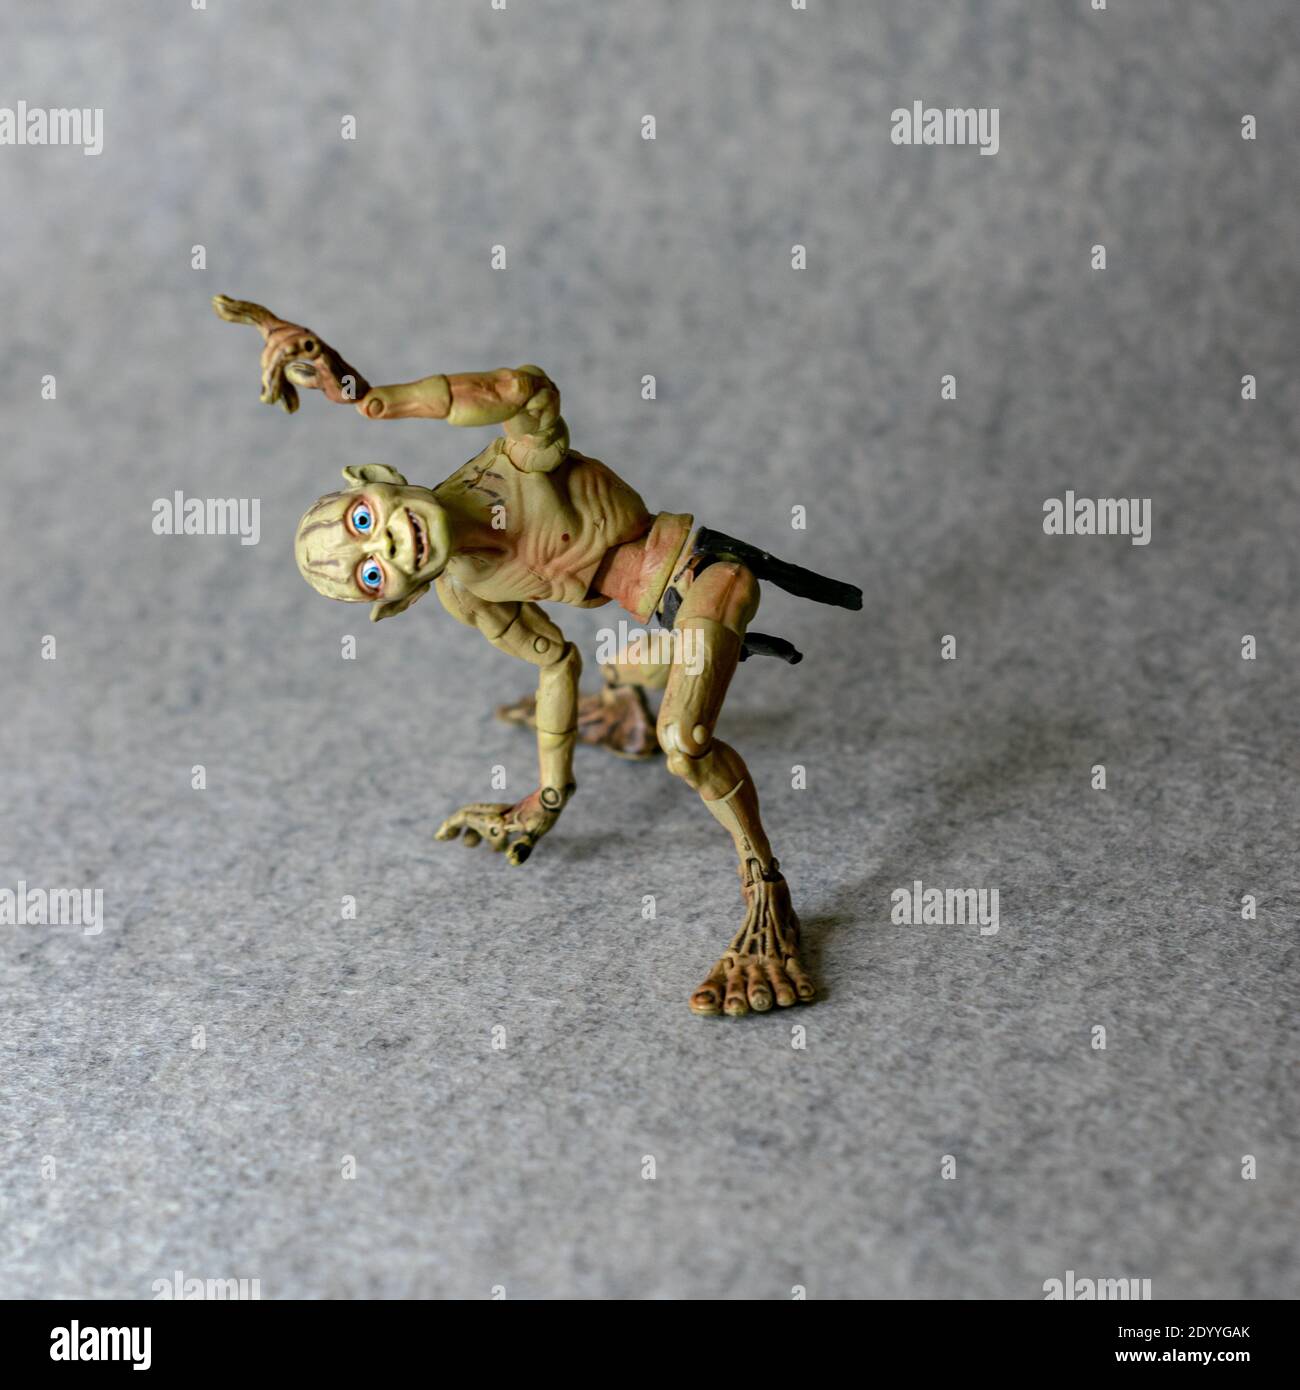 Lord of the rings smeagol aka Gollum figure or toy Stock Photo - Alamy